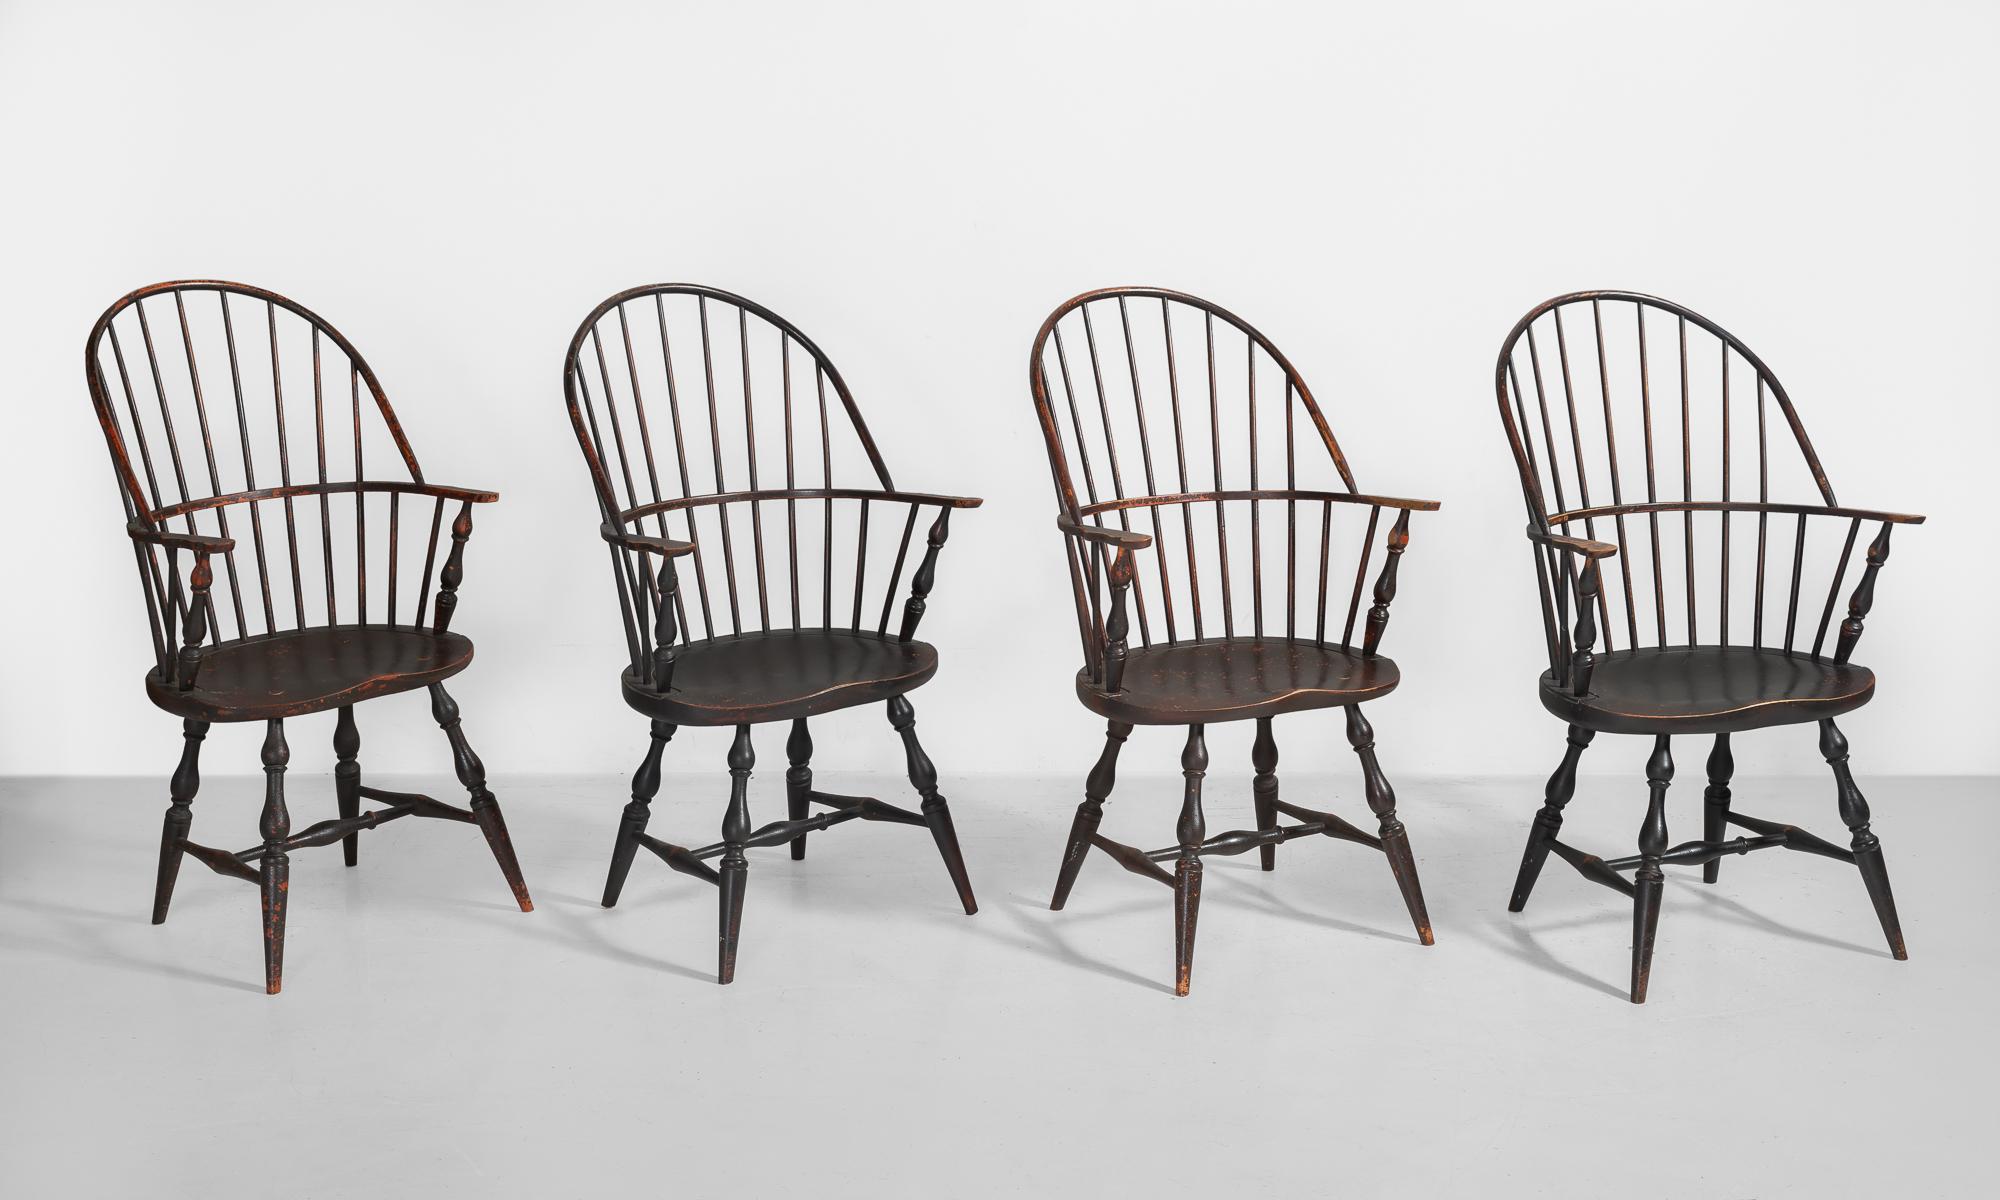 Sack back Windsor armchairs, England, circa 1900.

Sack back Windsor chairs with beautiful patina that highlights a deep red stain.

Measures: 23